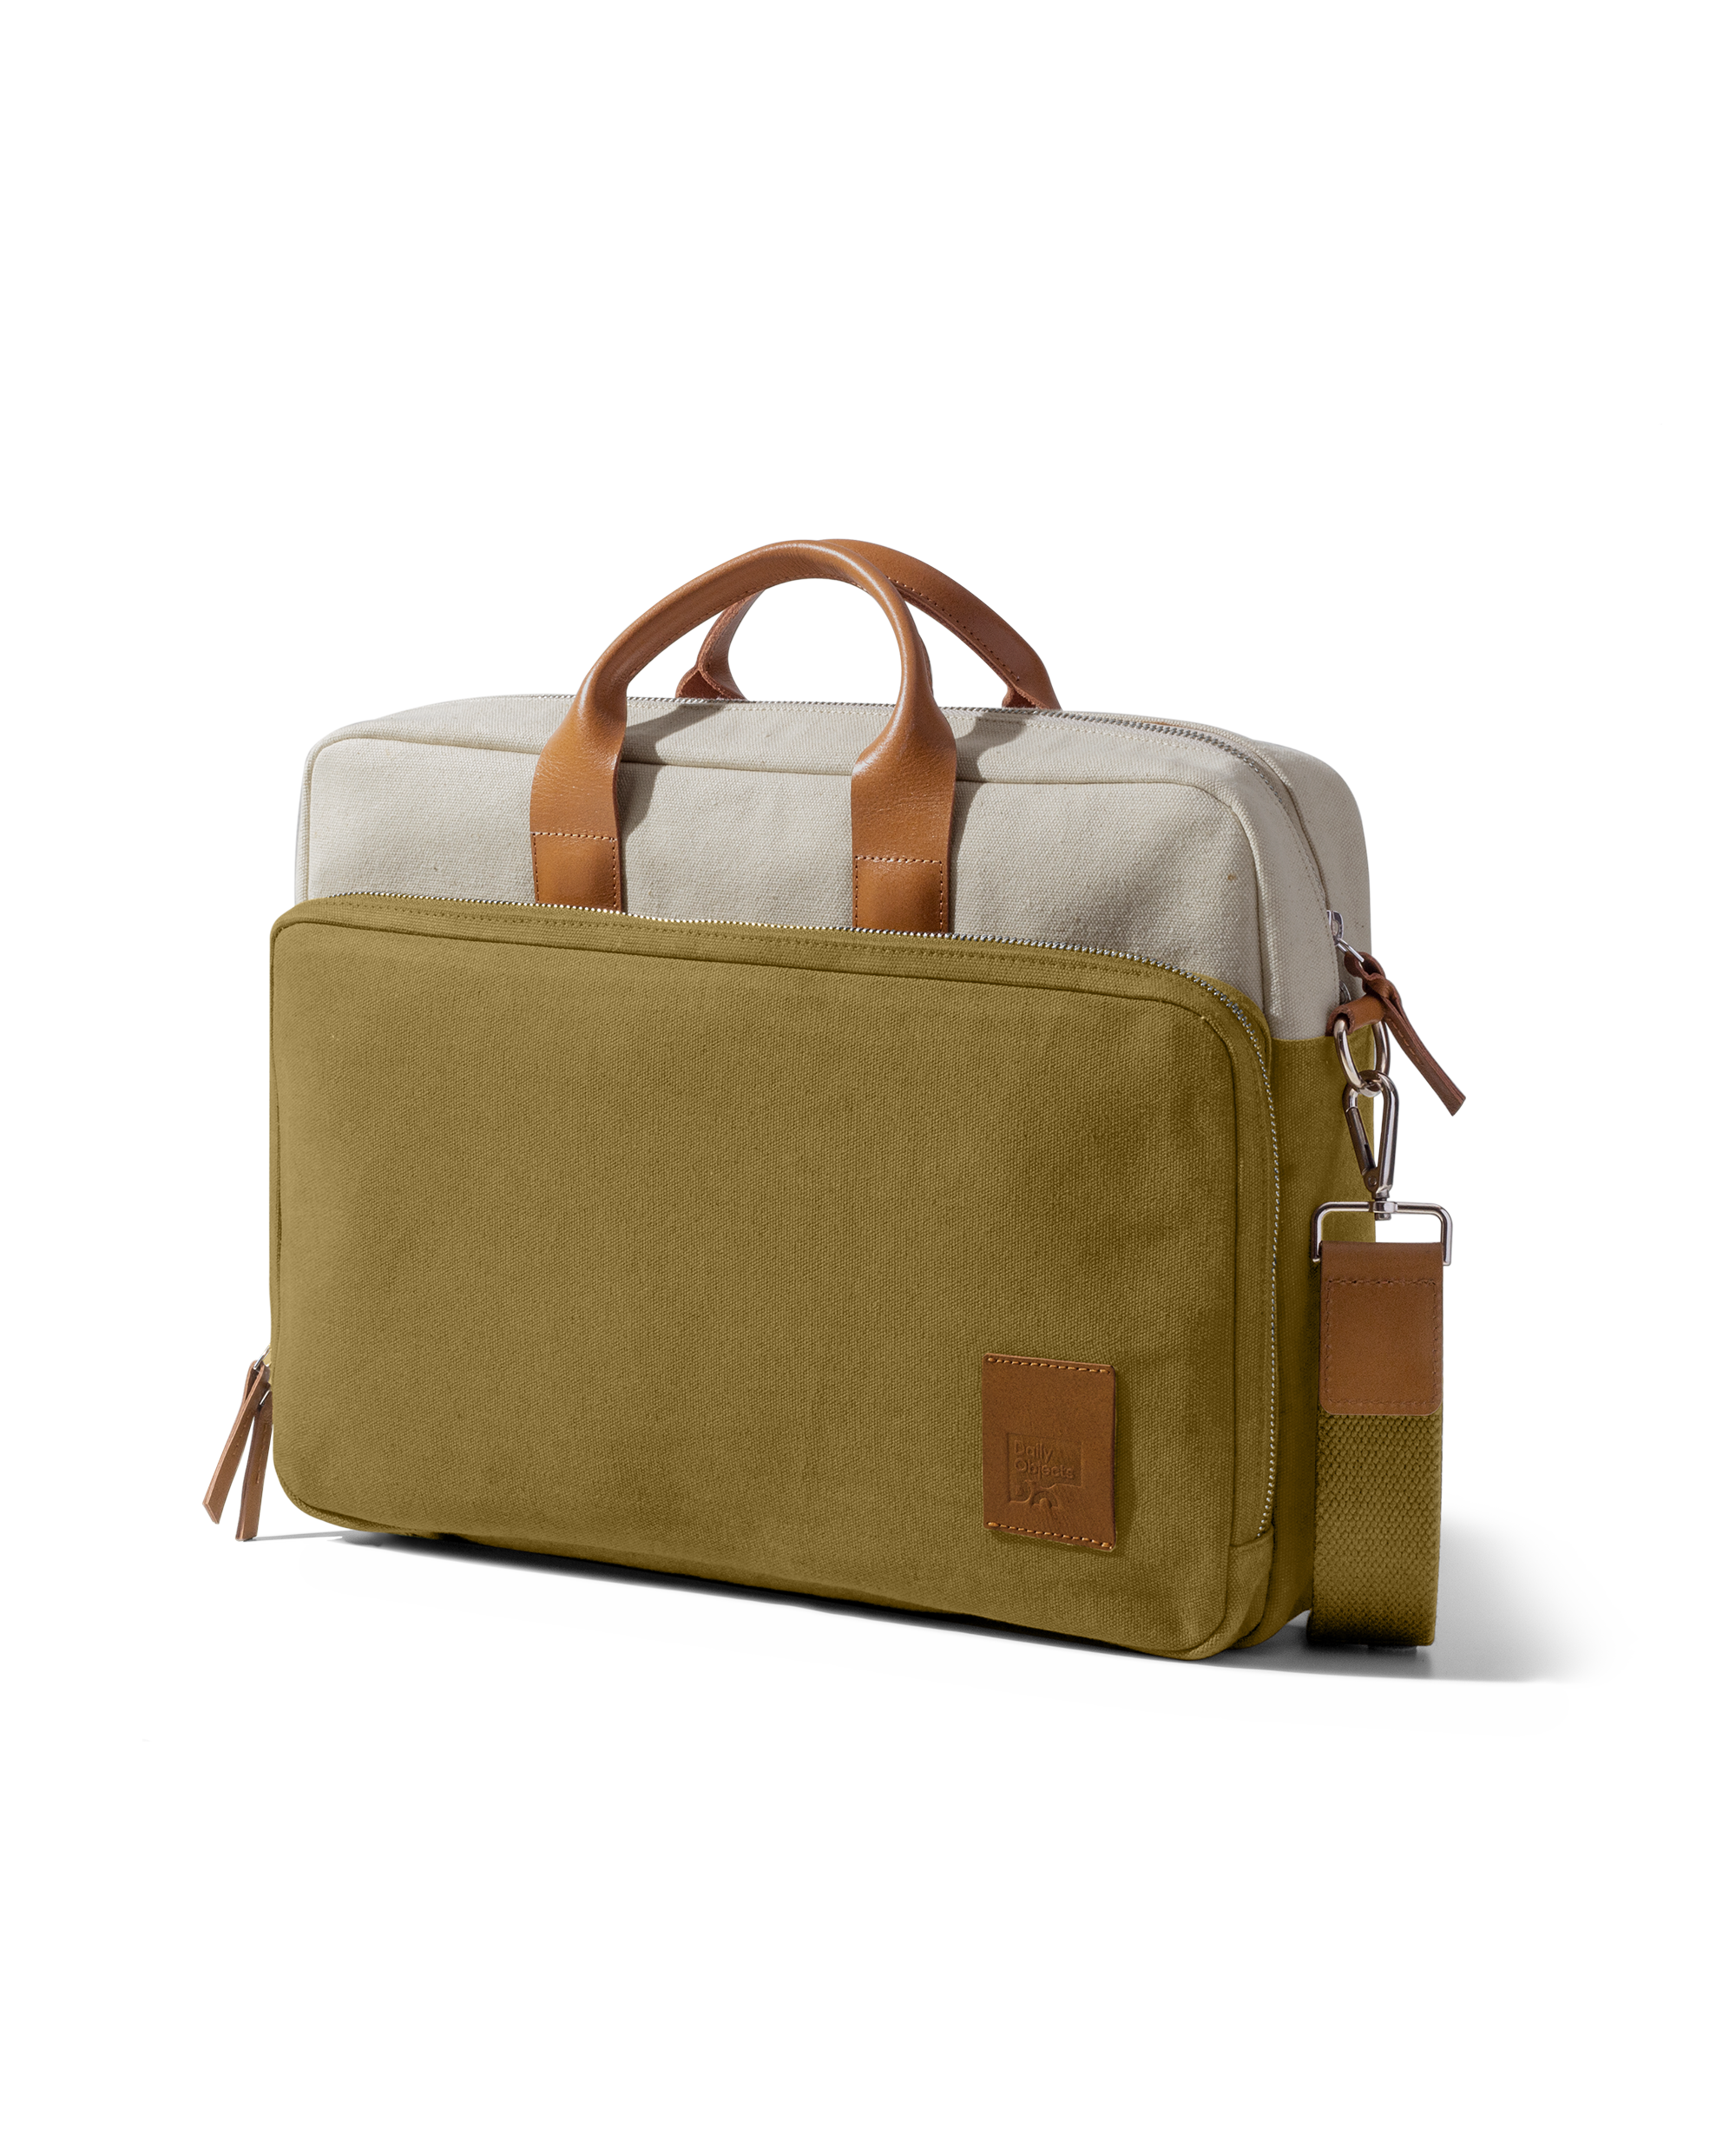 A stylish new Moshi laptop bag perfect for smaller tech